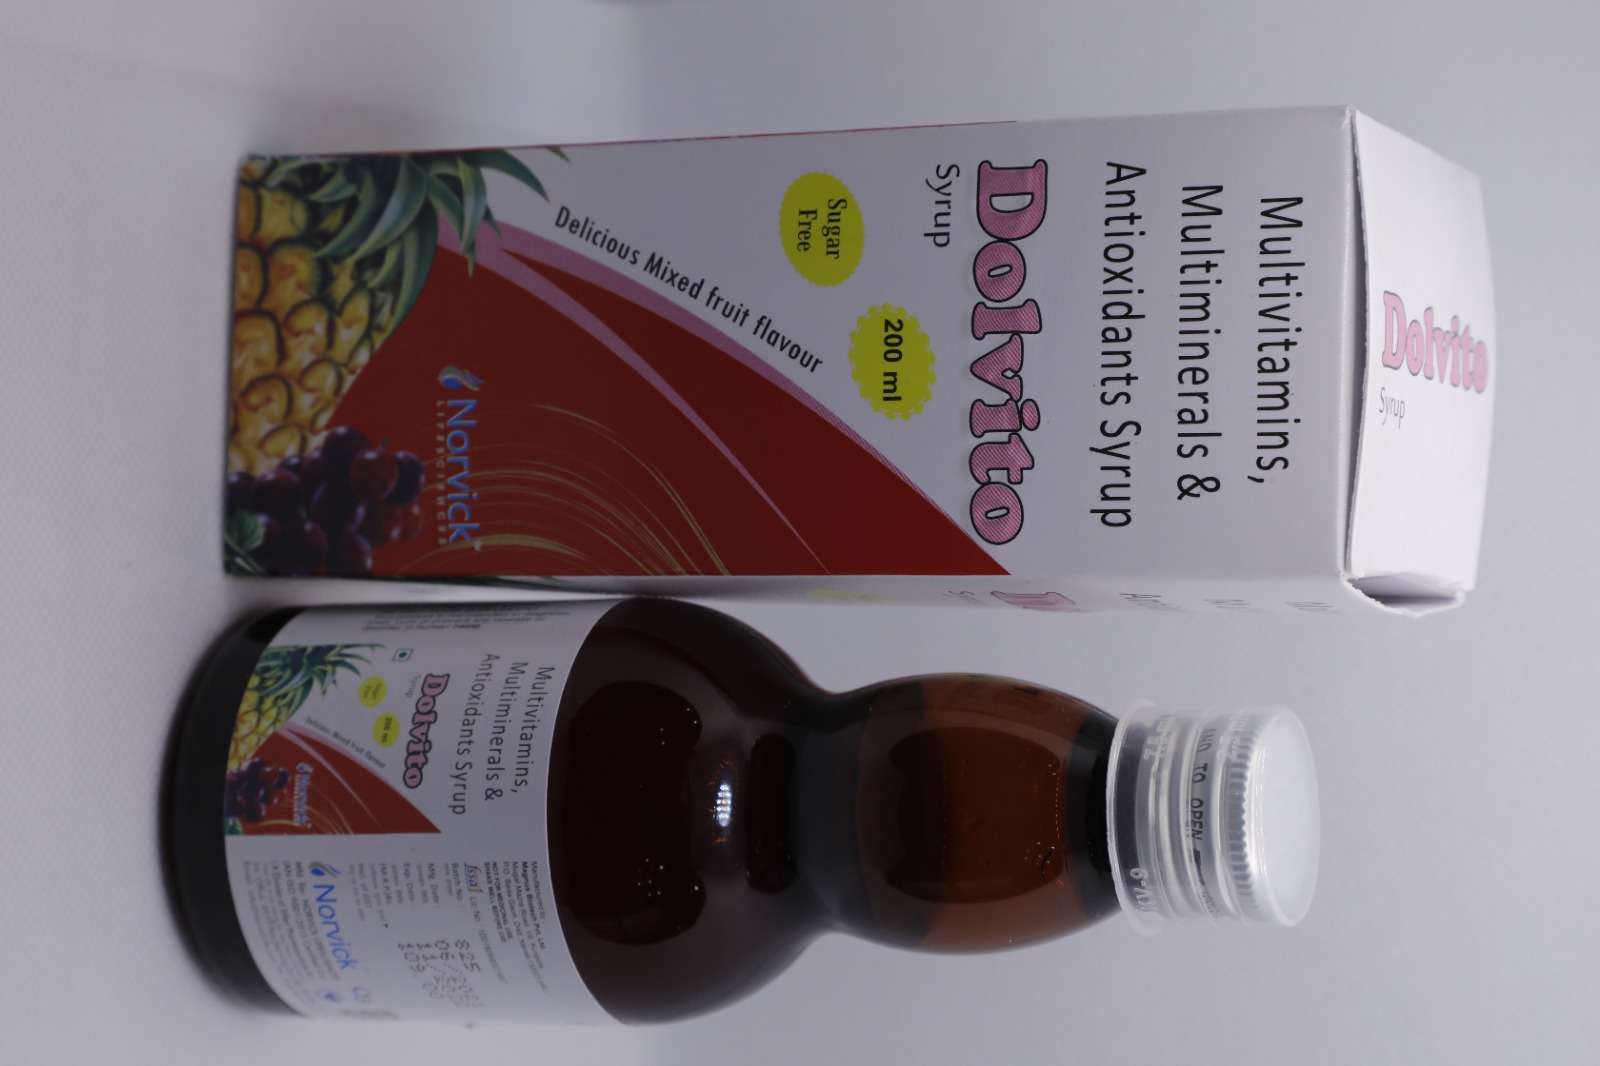 multivitamin, multiminerals with antioxidant syrup